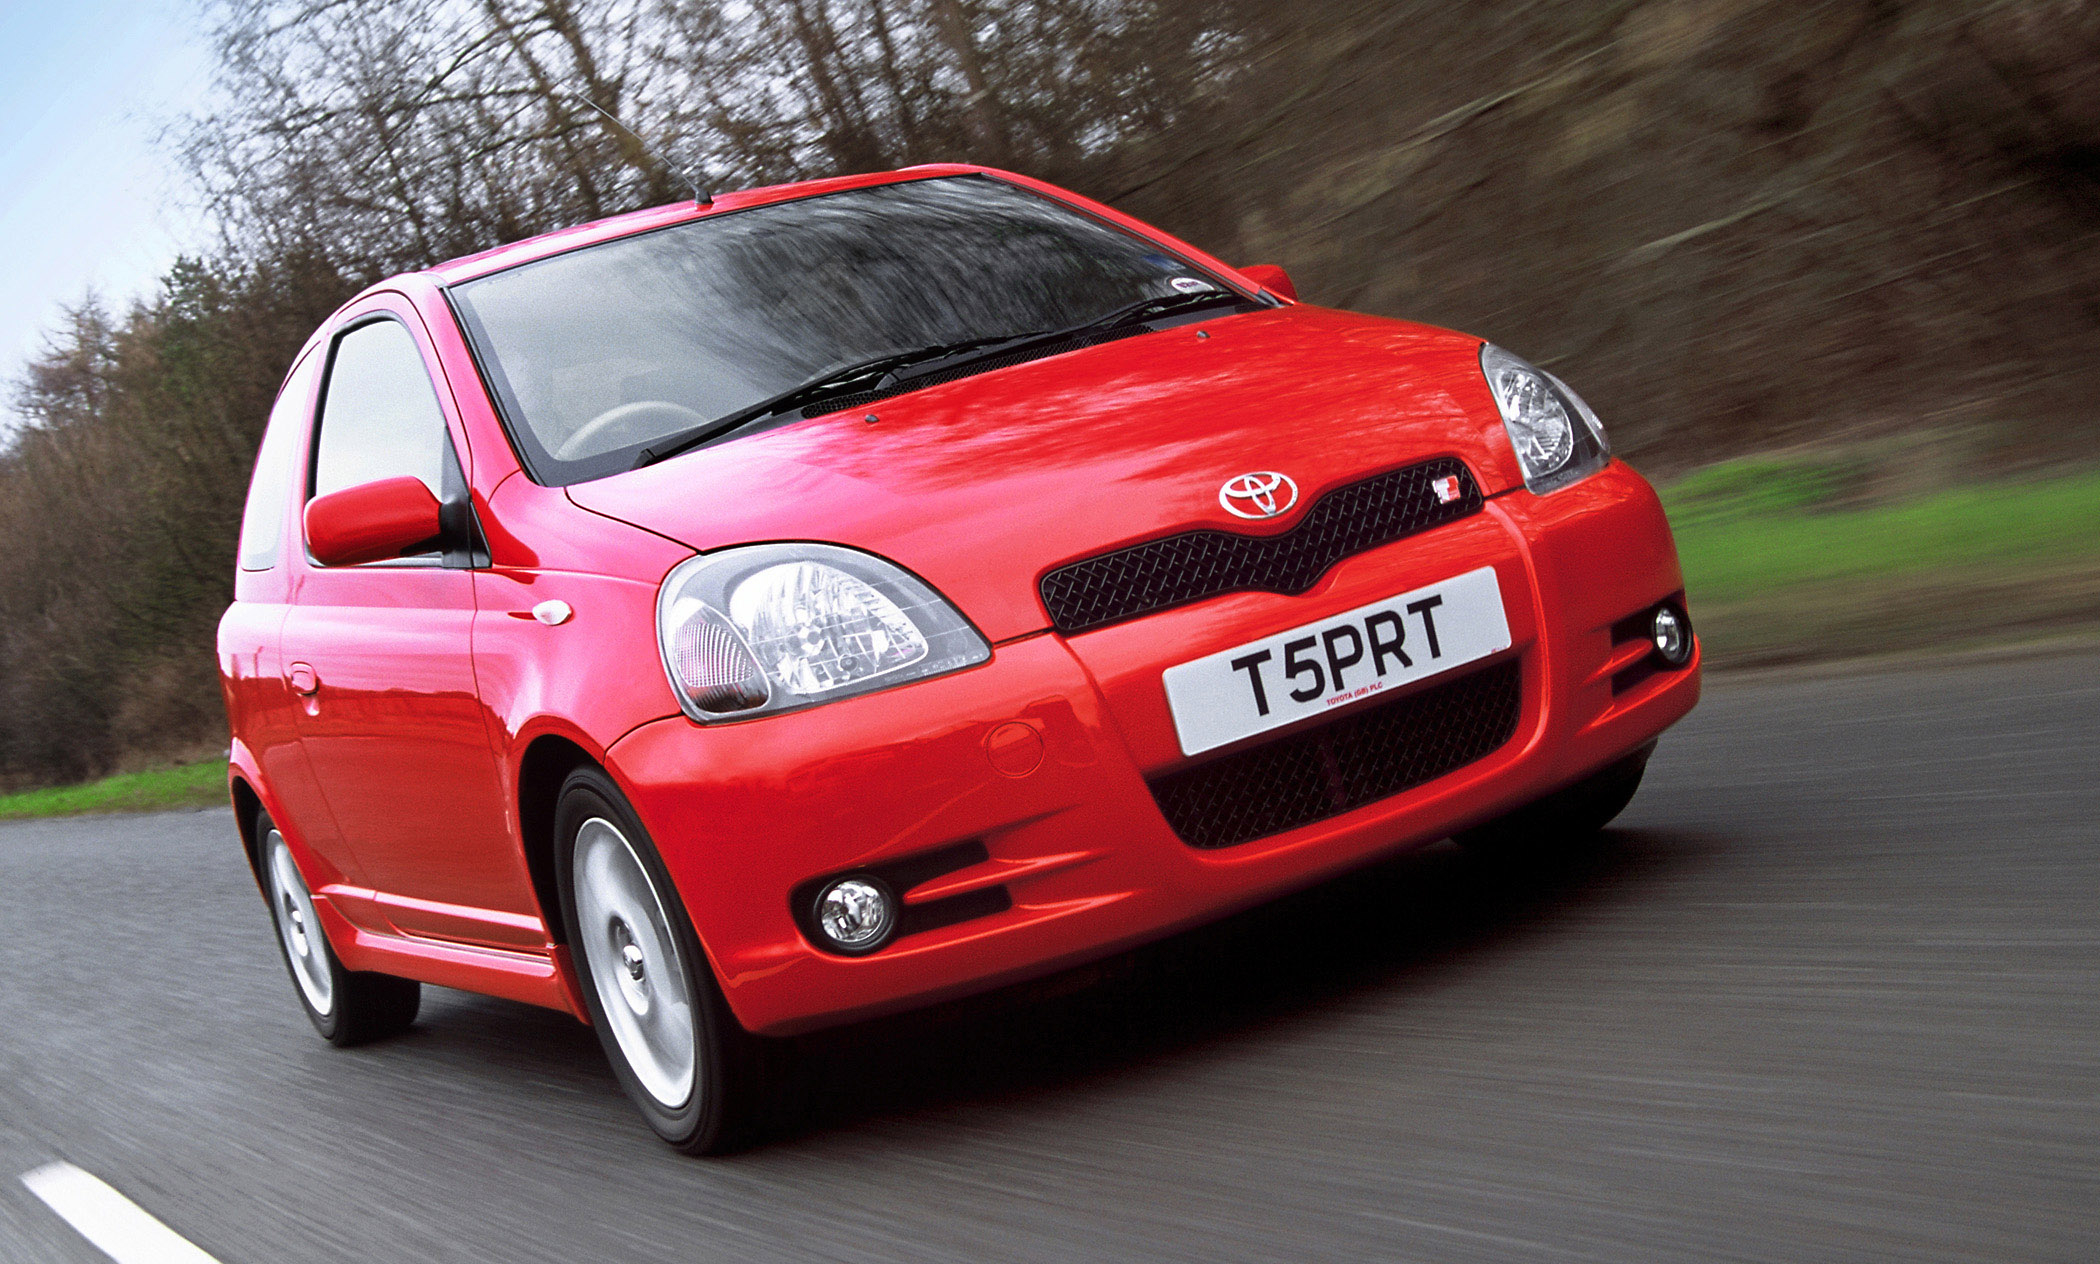 Toyota Yaris T Sport 2001 Picture 3 Of 13